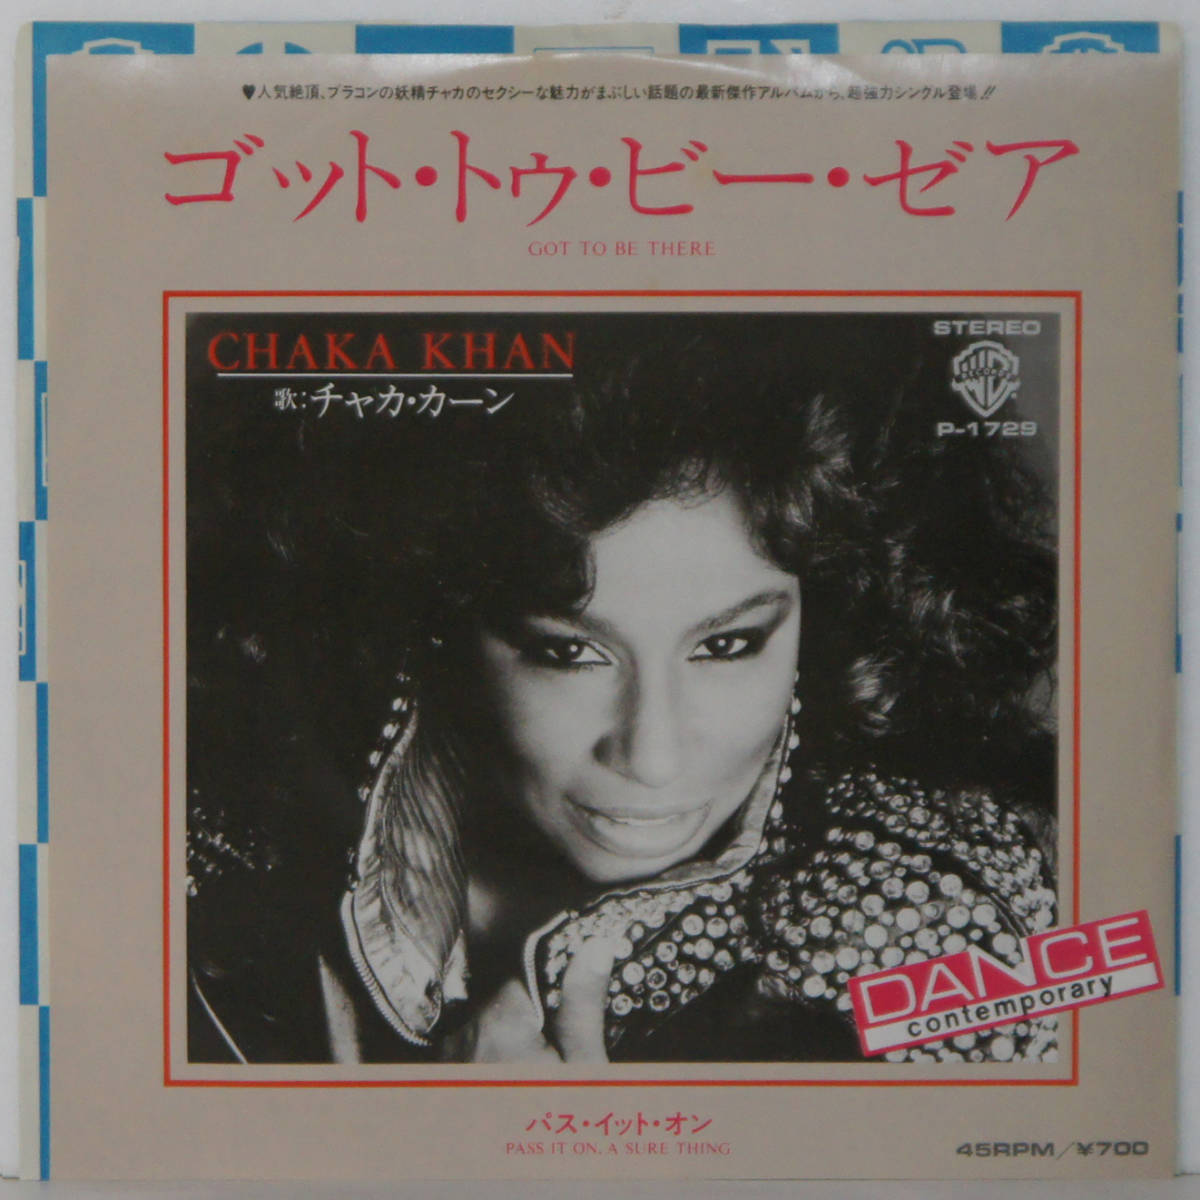 00523i 見本盤 7inch● CHAKA KHAN / GOT TO BE THERE / PASS IT ON. A SURE THING ●P-1729 チャカ・カーン サンプル 非売品_画像1